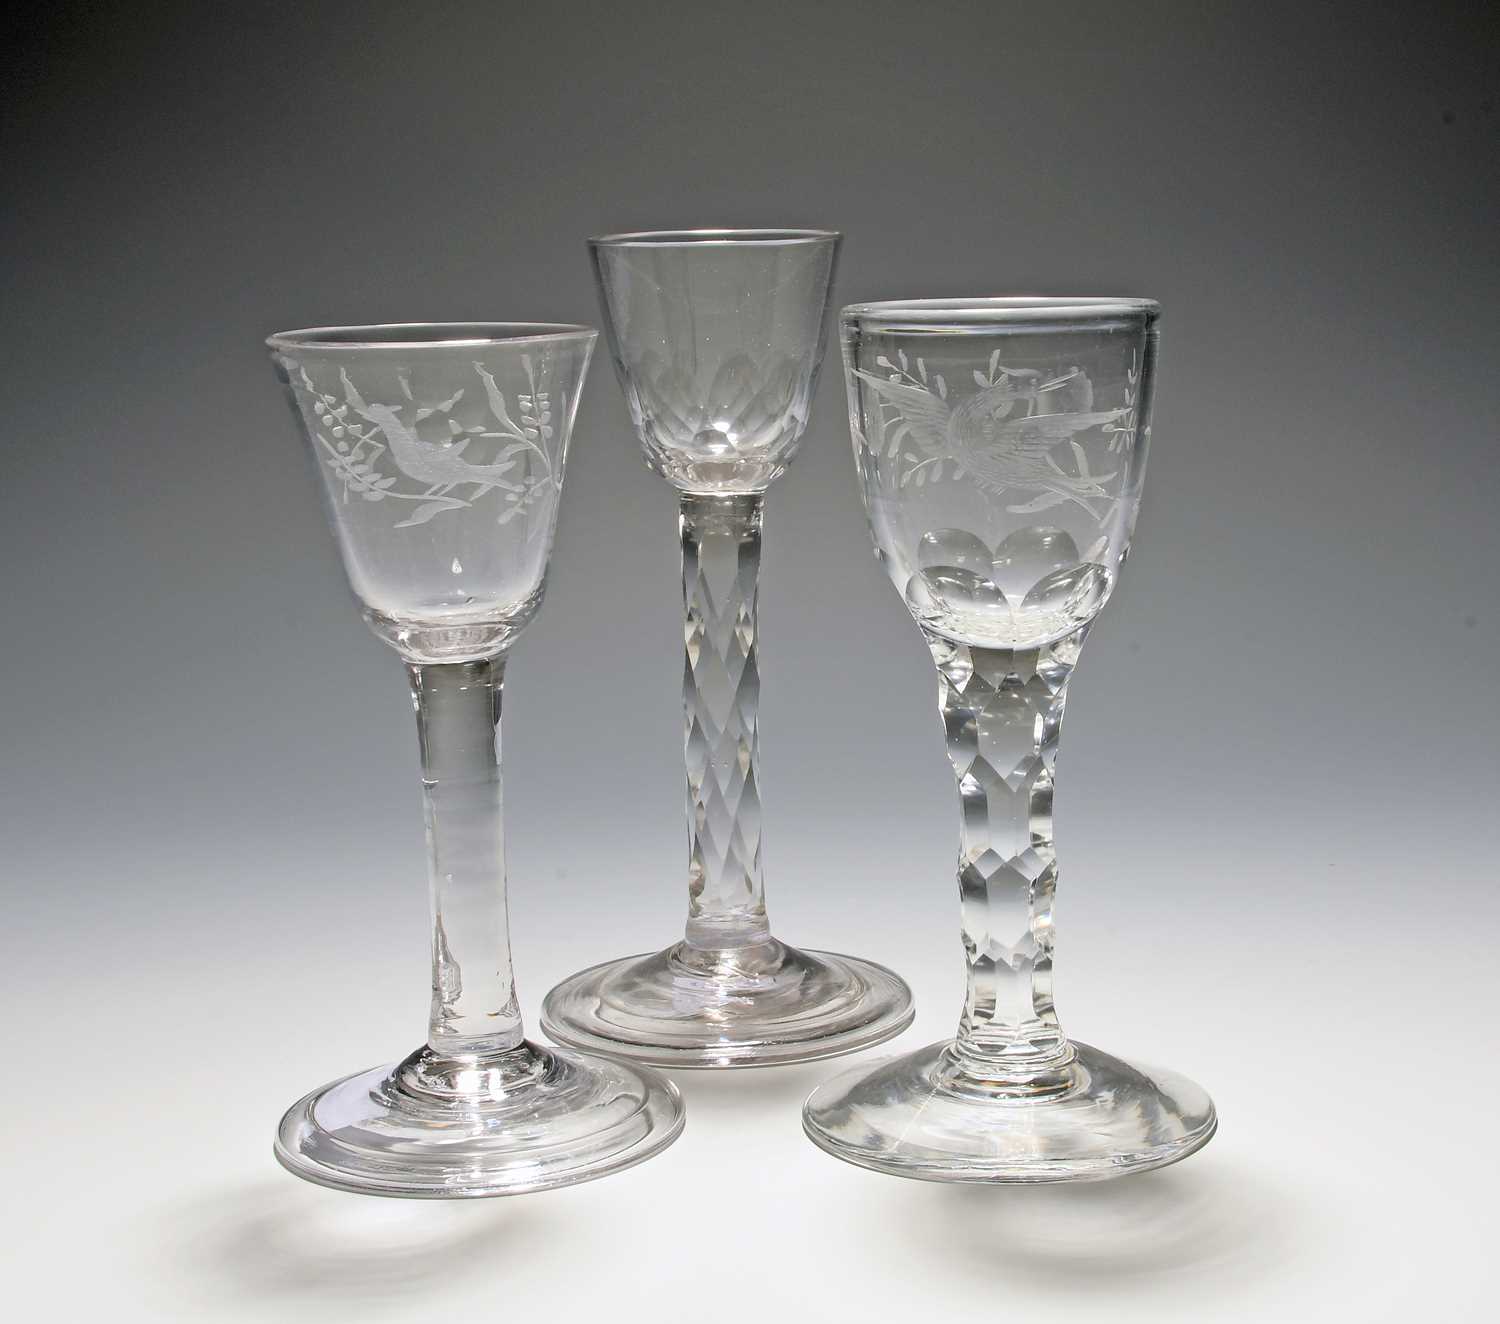 Three small wine glasses, c.1760, two of possible Jacobite significance, engraved with a bird and